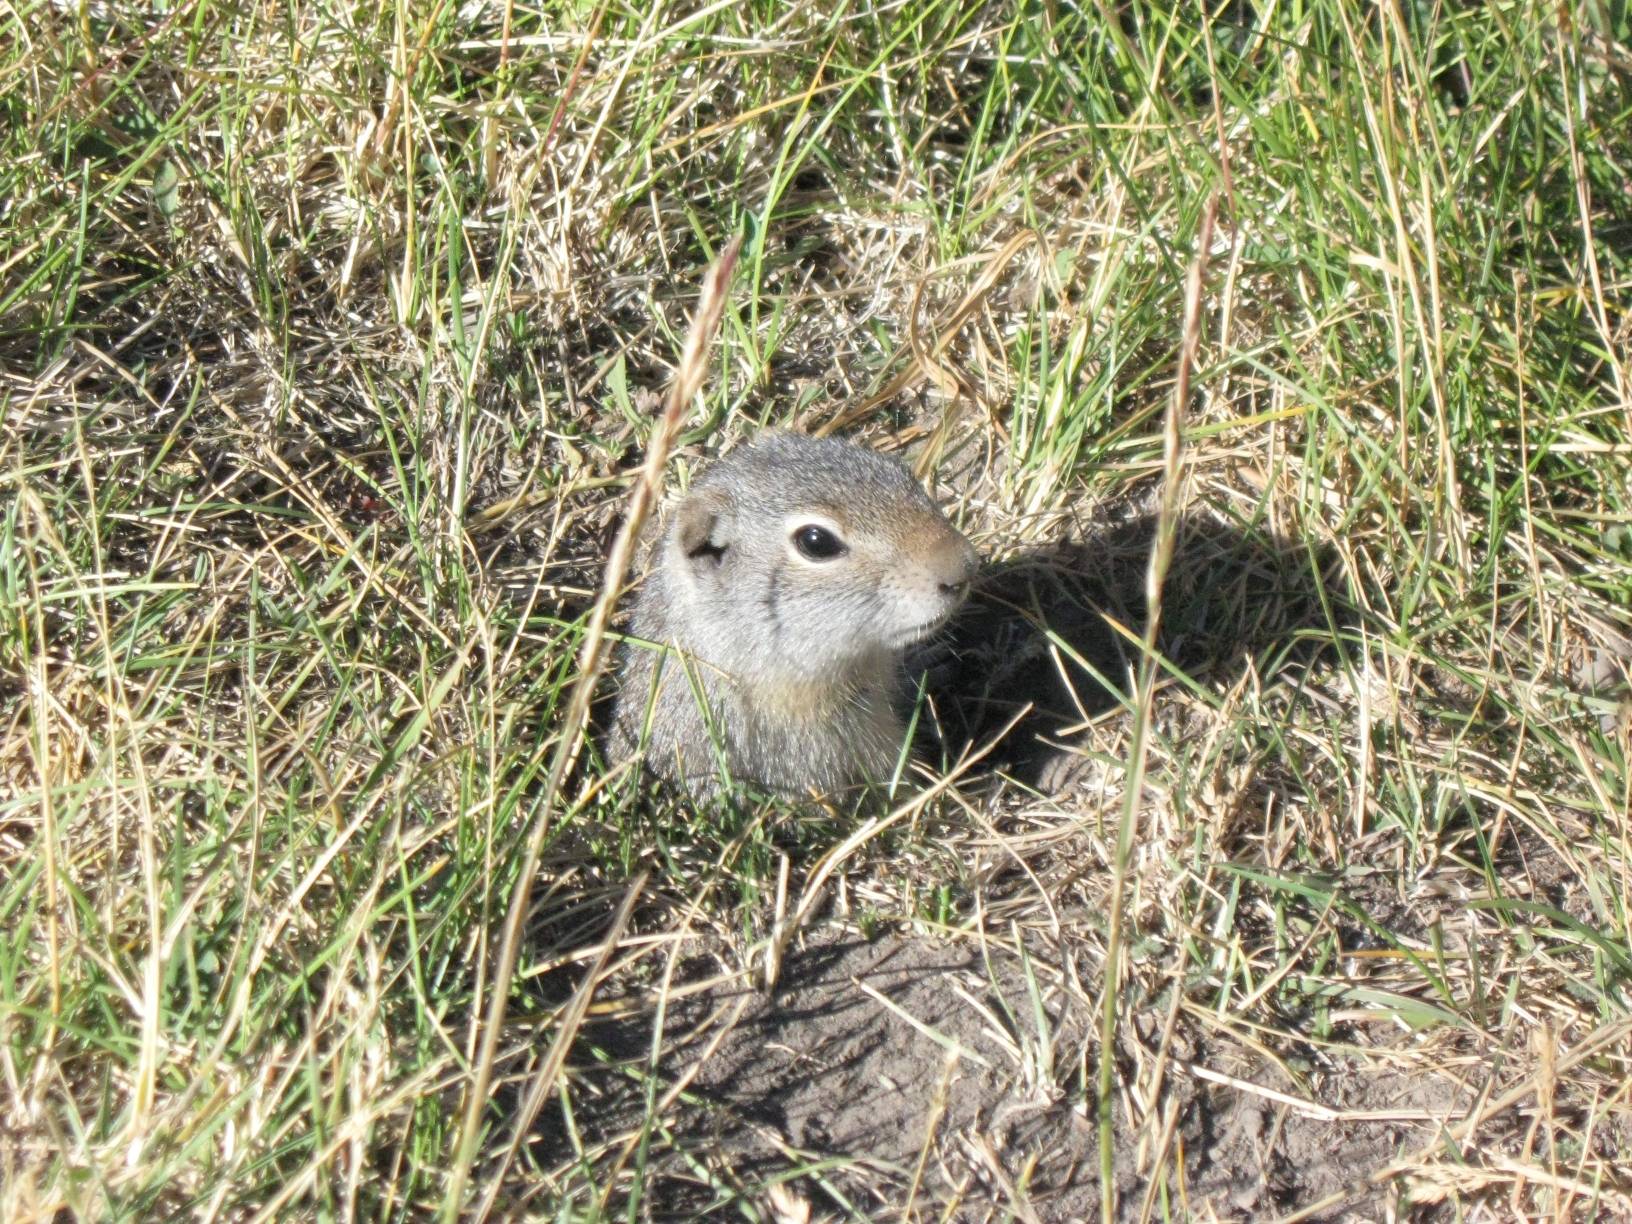 Image: A ground squirrel peaking outside its burrow at the Lower Schwabacher Landing